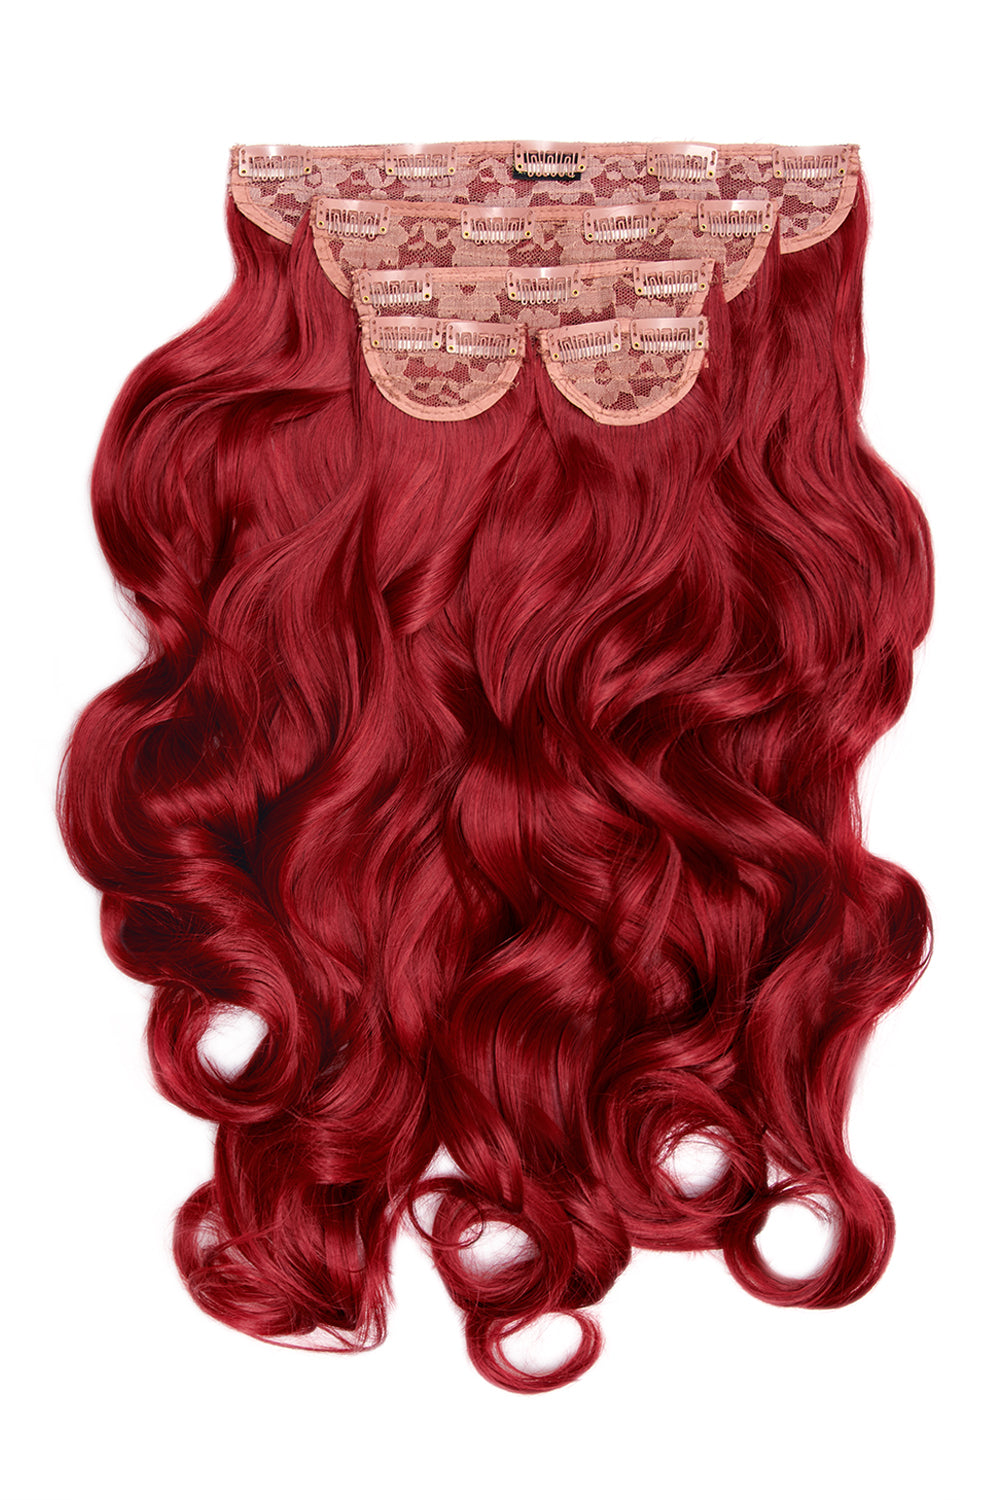 Super Thick 22" 5 Piece Curly Clip Hair Extensions + Hair Care Bundle - Ruby Red